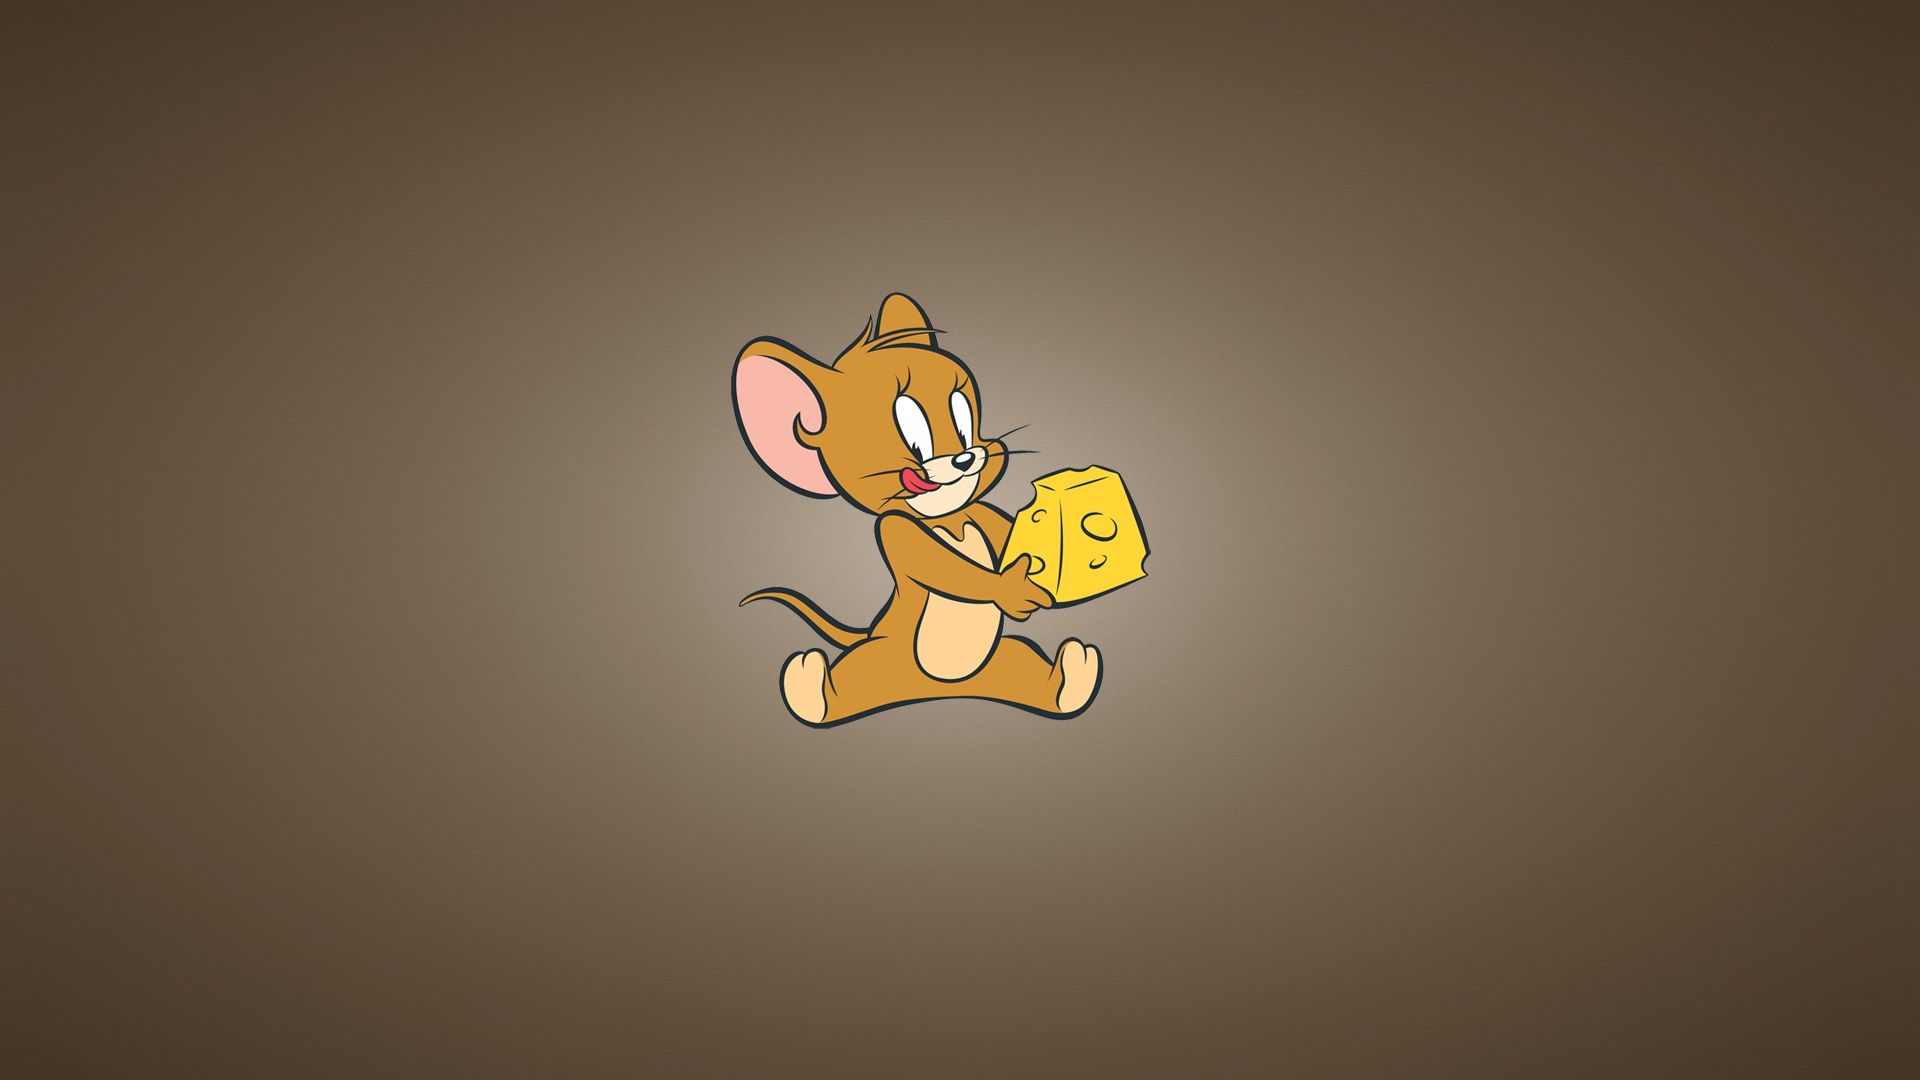 Wallpaper tom and jerry, cheese, mouse, minimalism. Tom and jerry wallpaper, Cartoon wallpaper, Tom and jerry